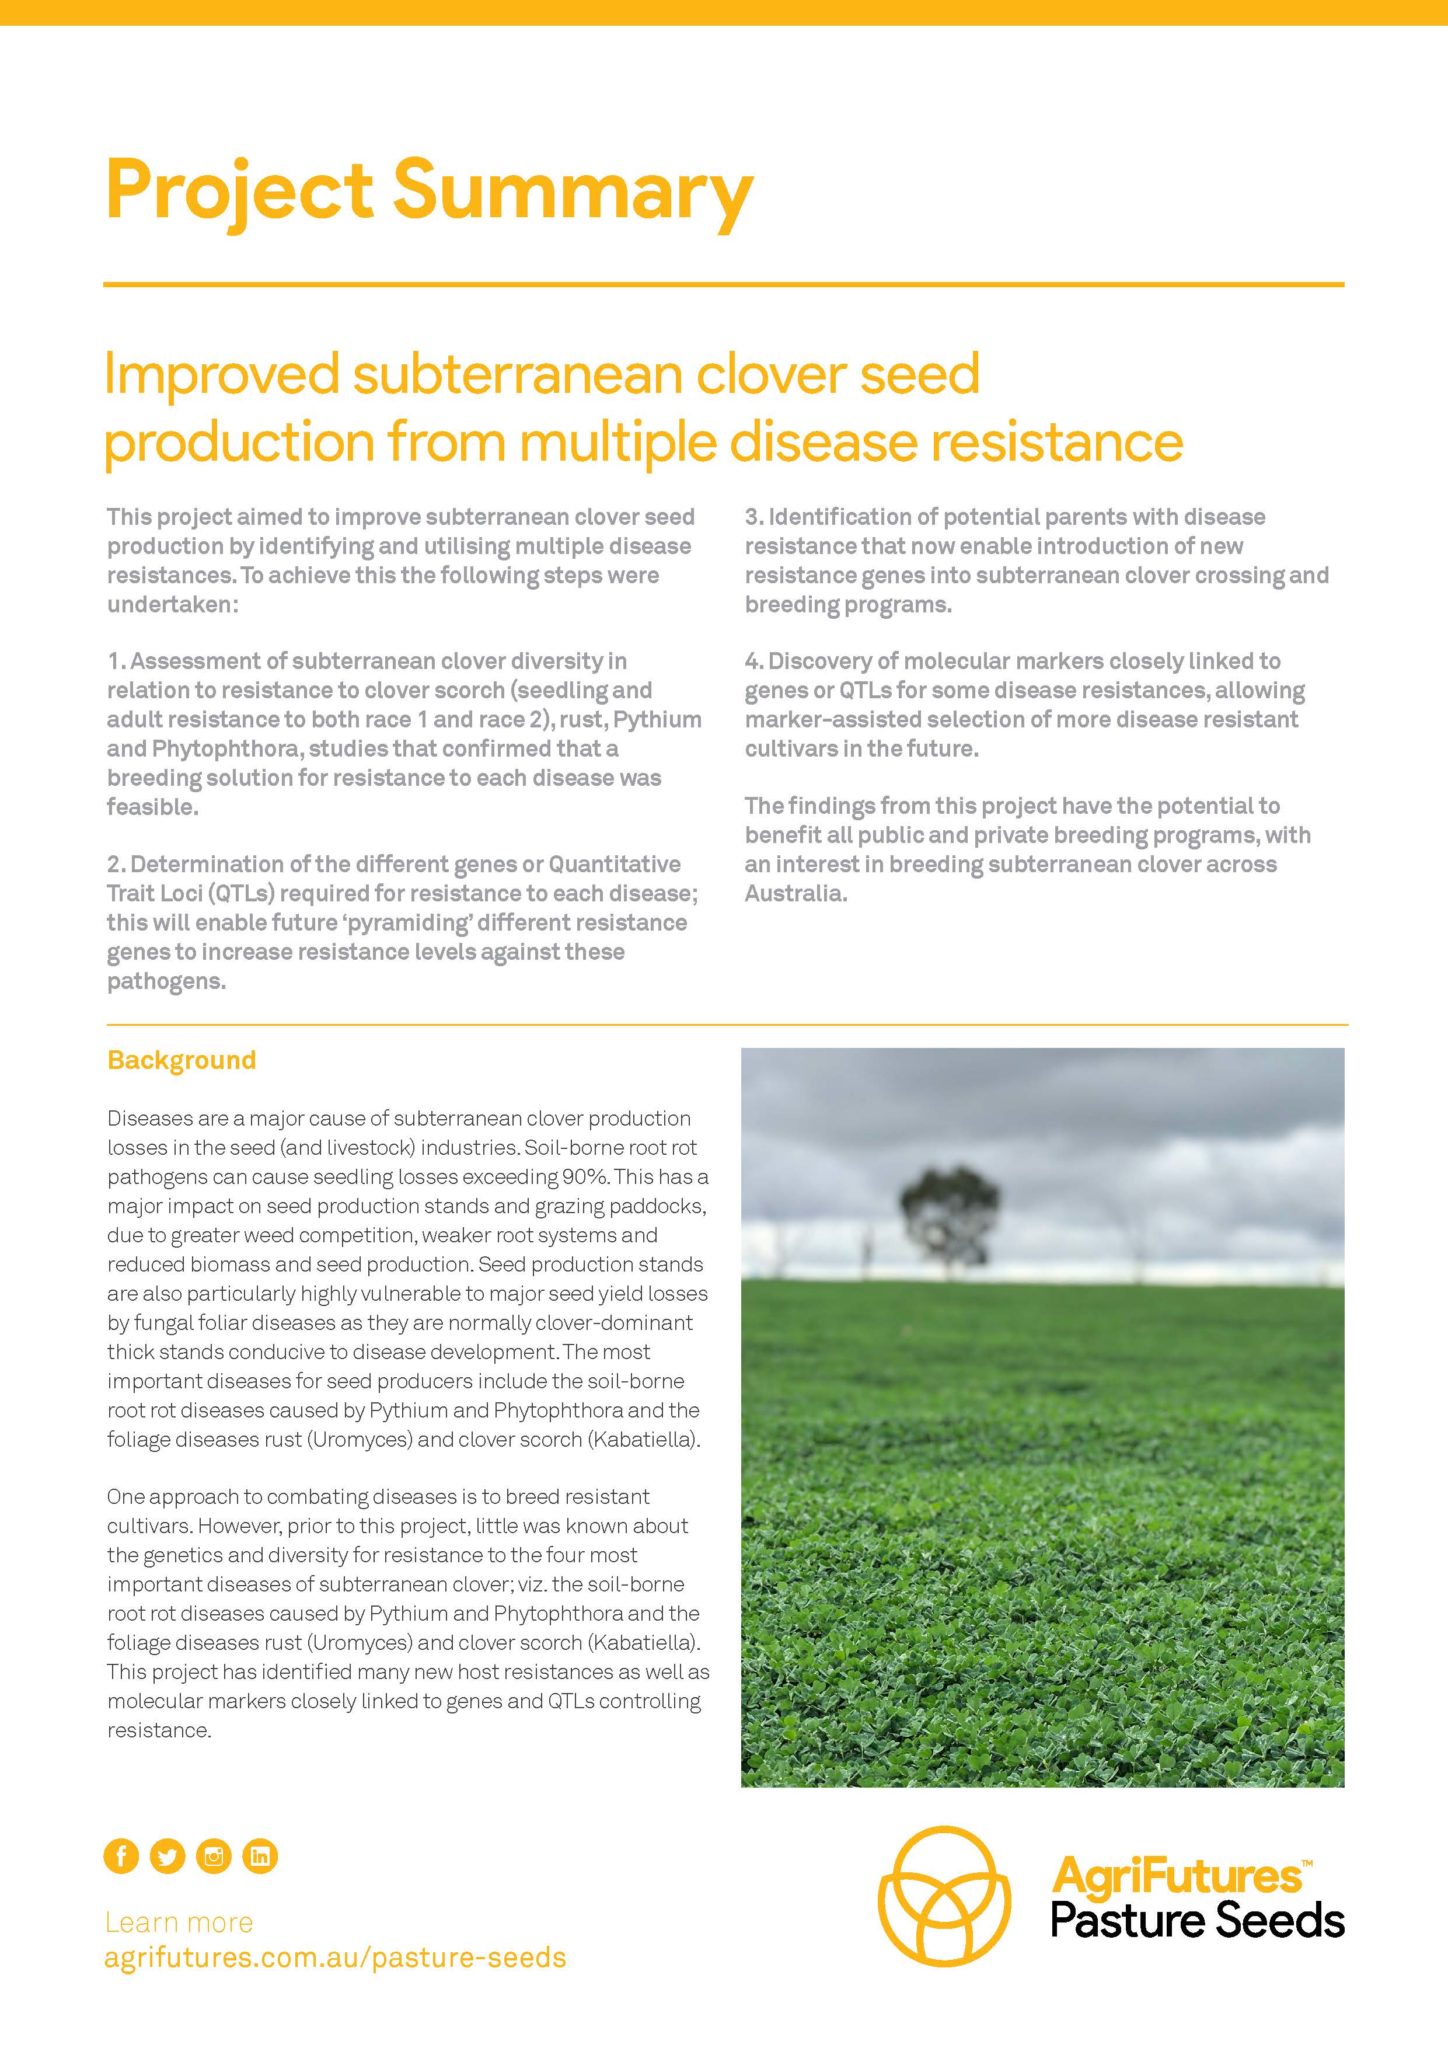 Project summary: Improved subterranean clover seed production from multiple disease resistance - image